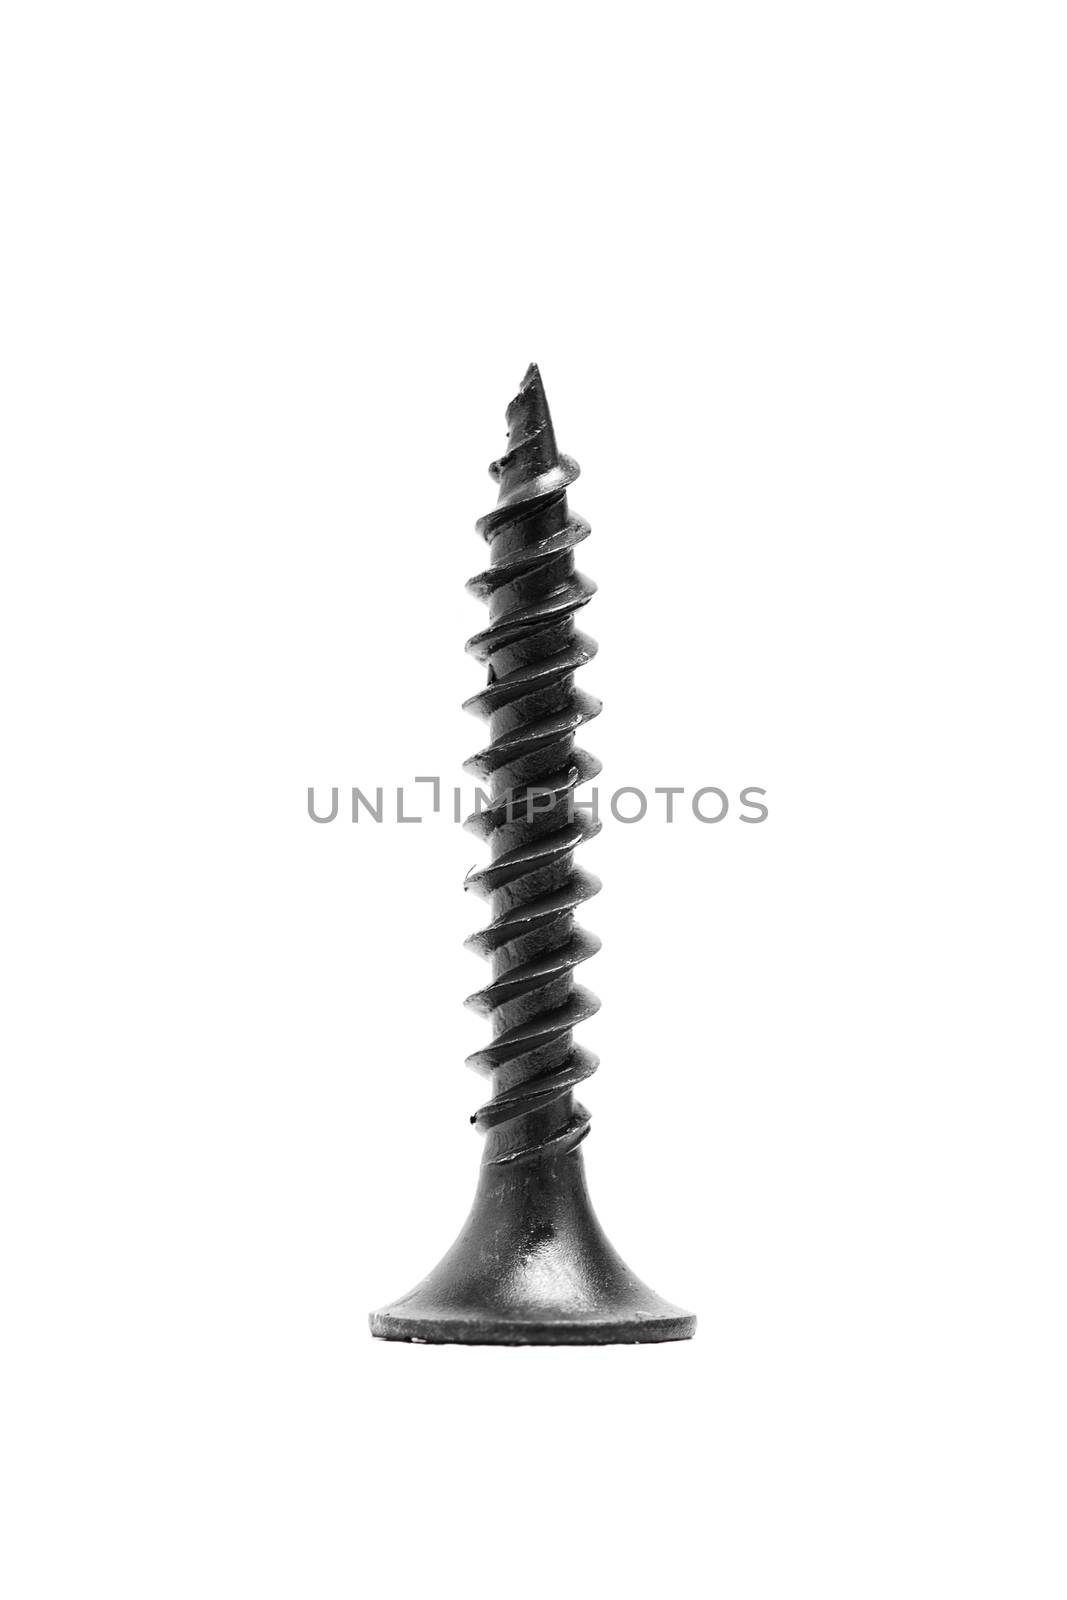 black screw for fixing drywall on metal profiles